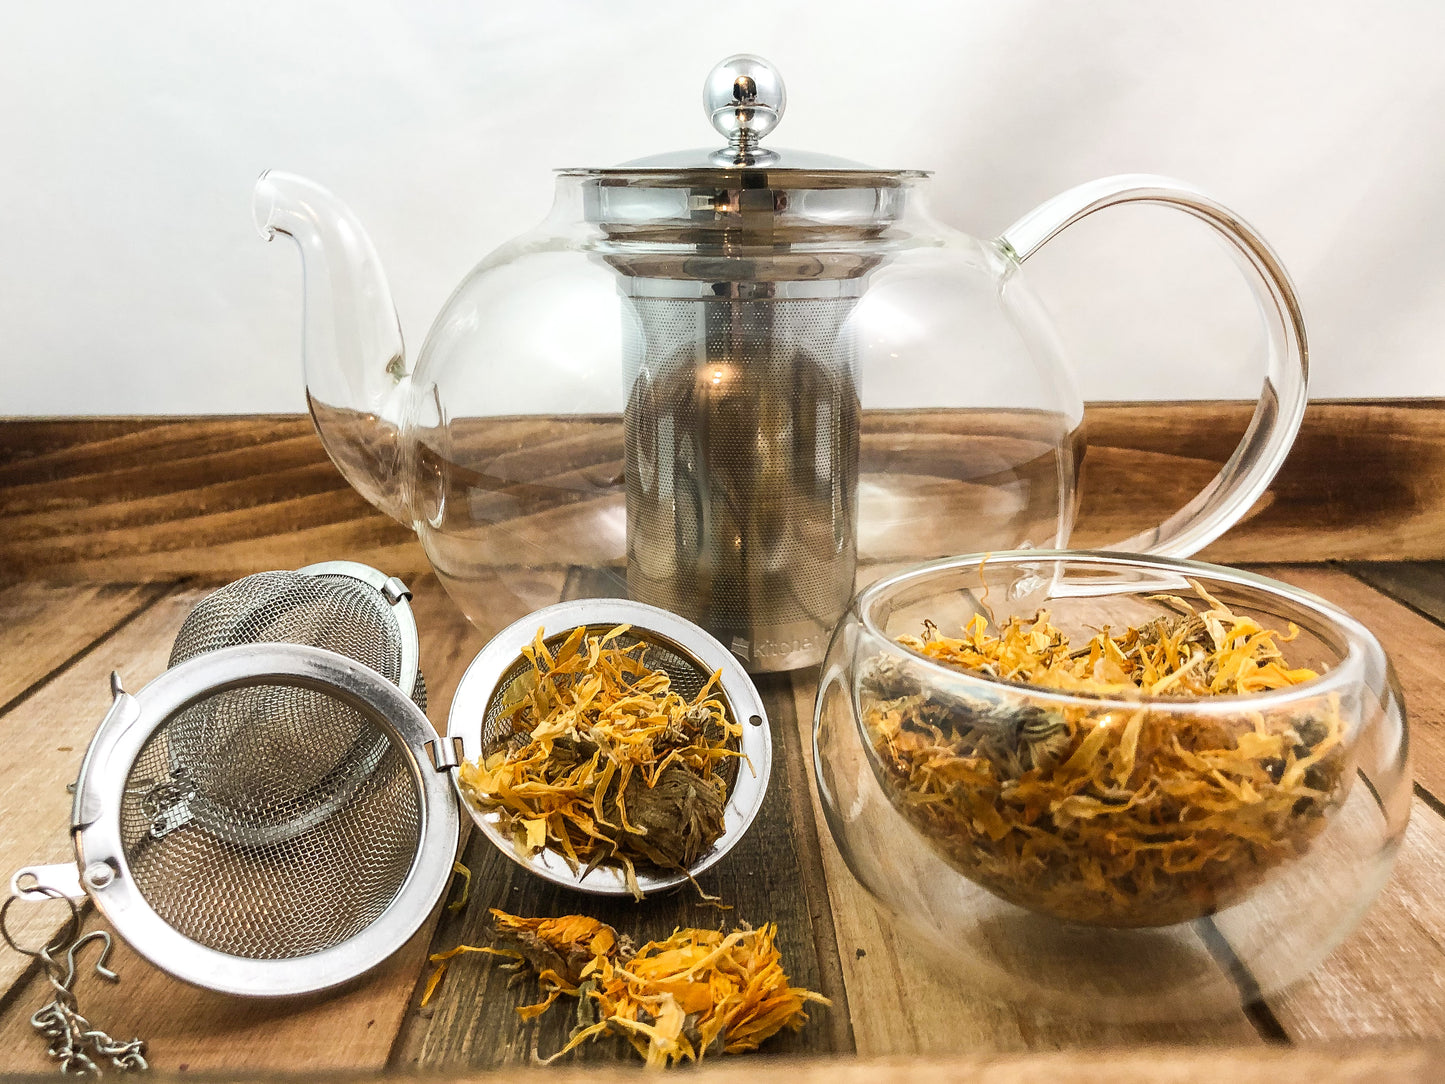 clear teapot with a clear small glass bowl full of dried calendula flowers in forefront, next to two mesh tea strainers, one being open with dried calendula flowers inside and falling out, with a white background and wooden table